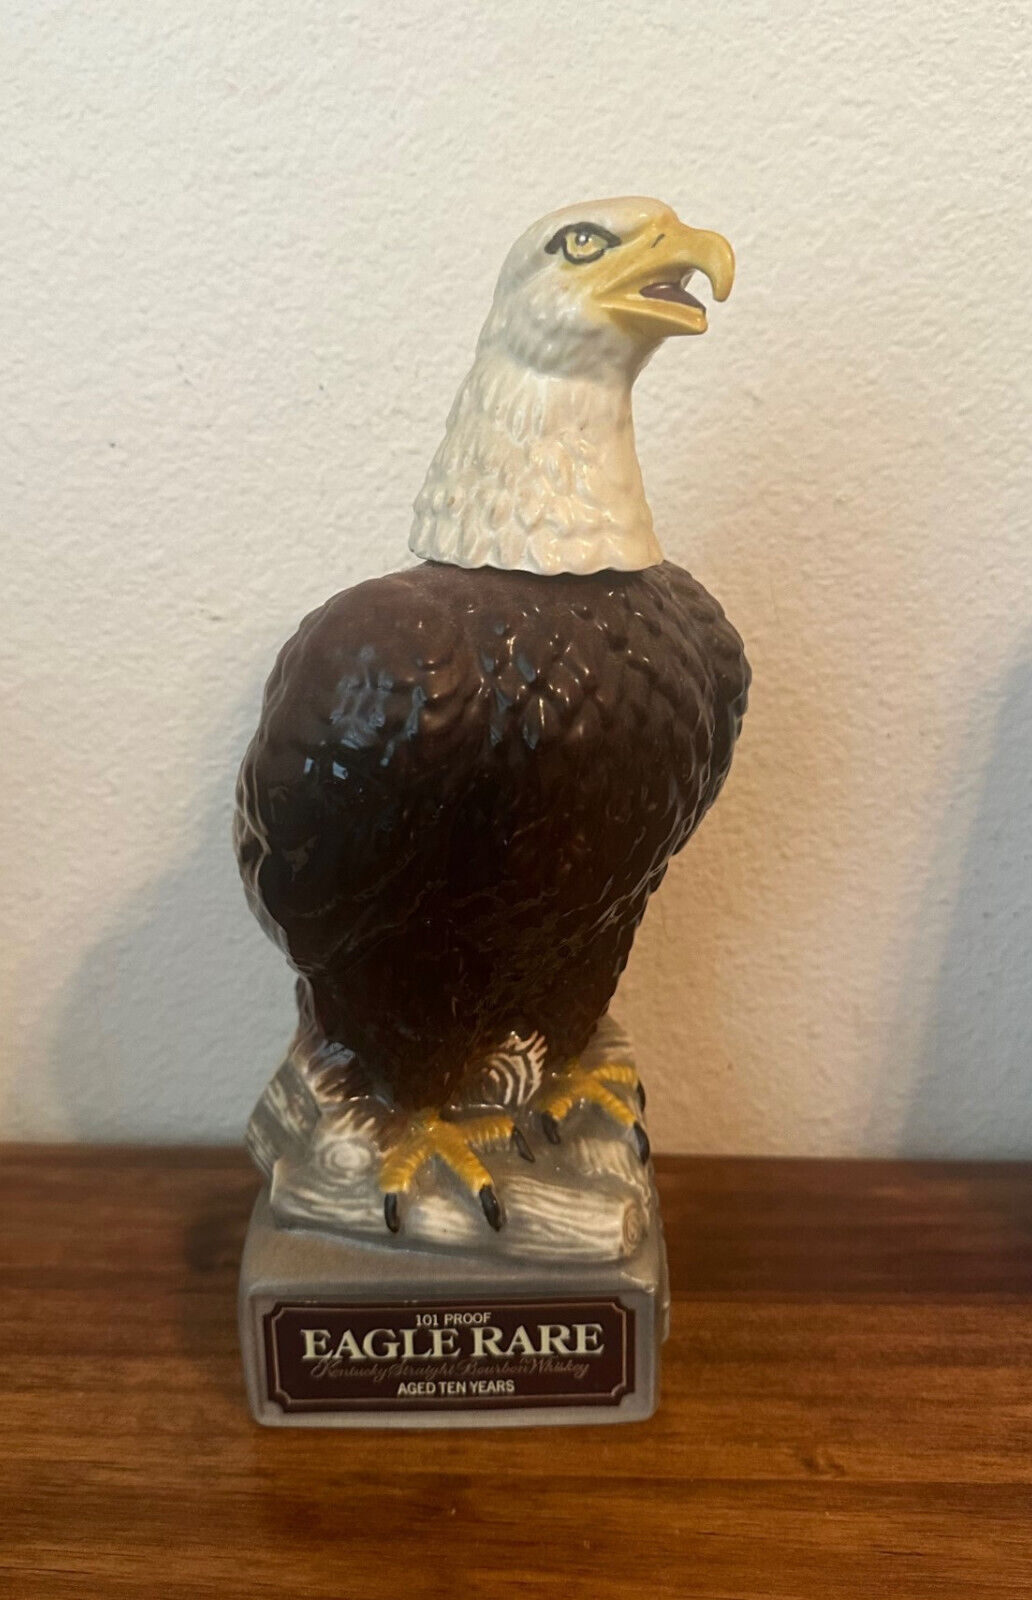 Vintage EAGLE RARE Whiskey Decanter- Bald Eagle, #1 in Series, 1979